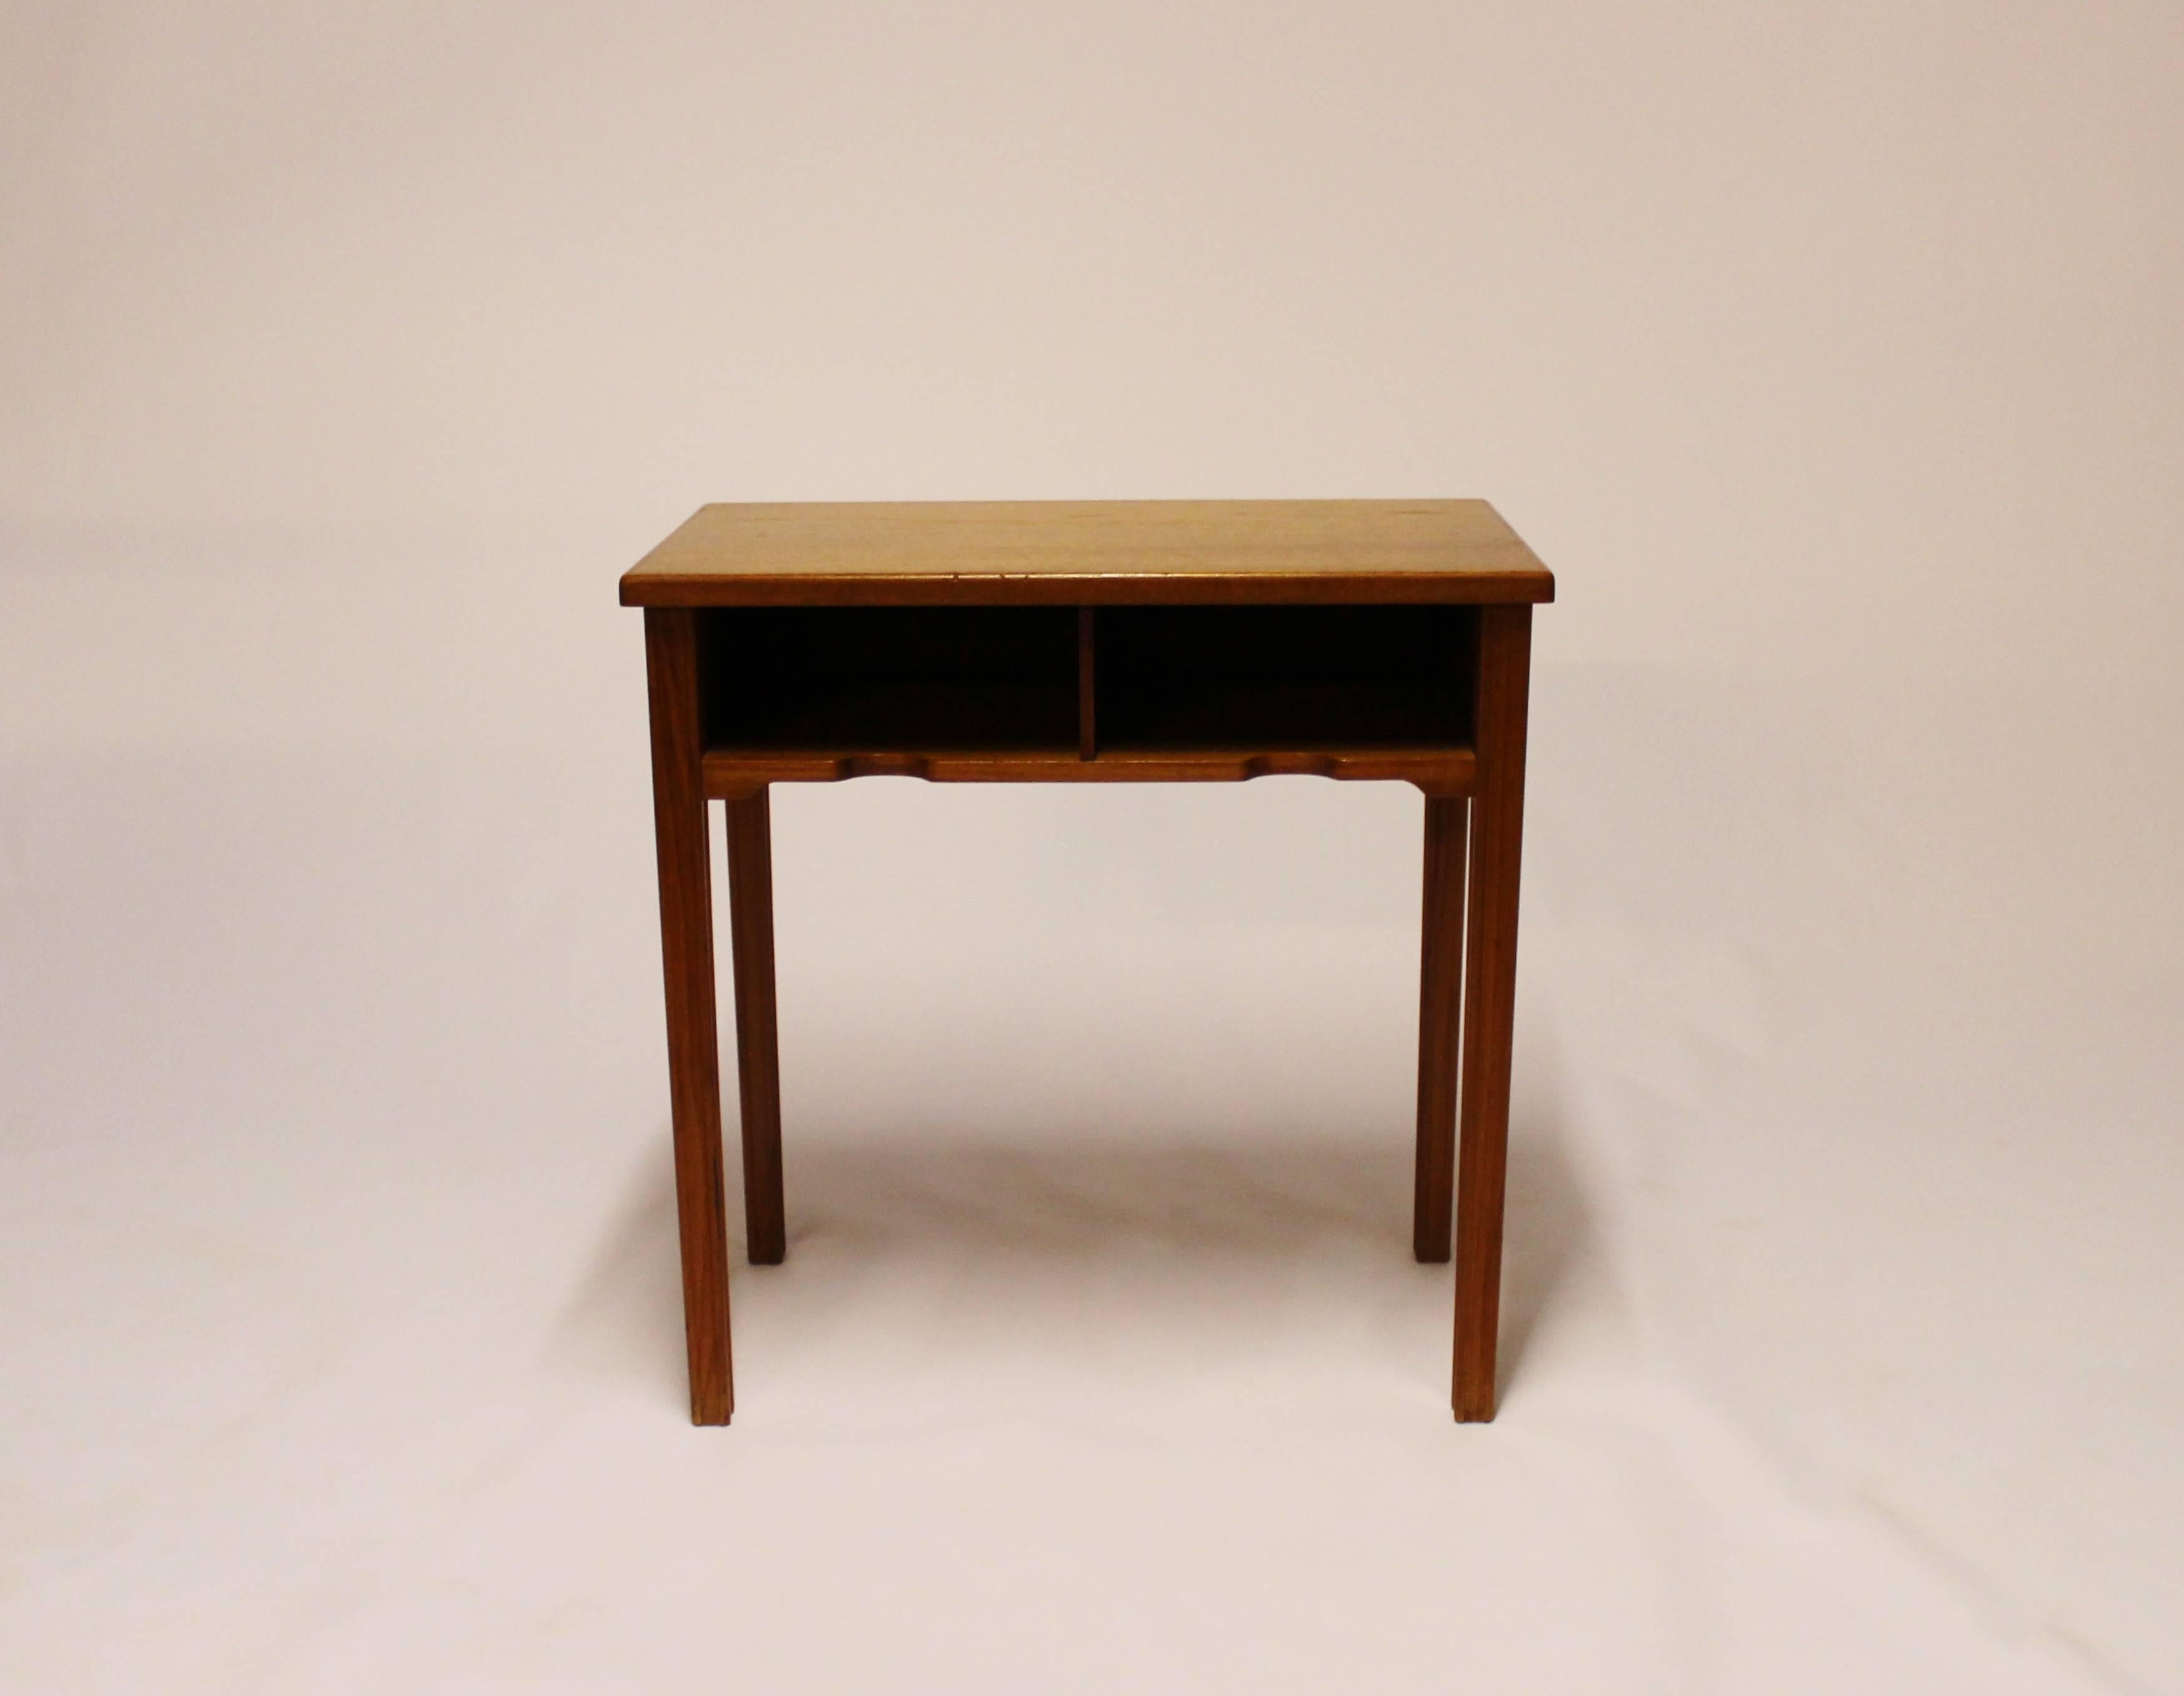 Small bedside table in teak of Danish design, manufactured by Flexi Møbler in the 1960s. The table is in great vintage condition.